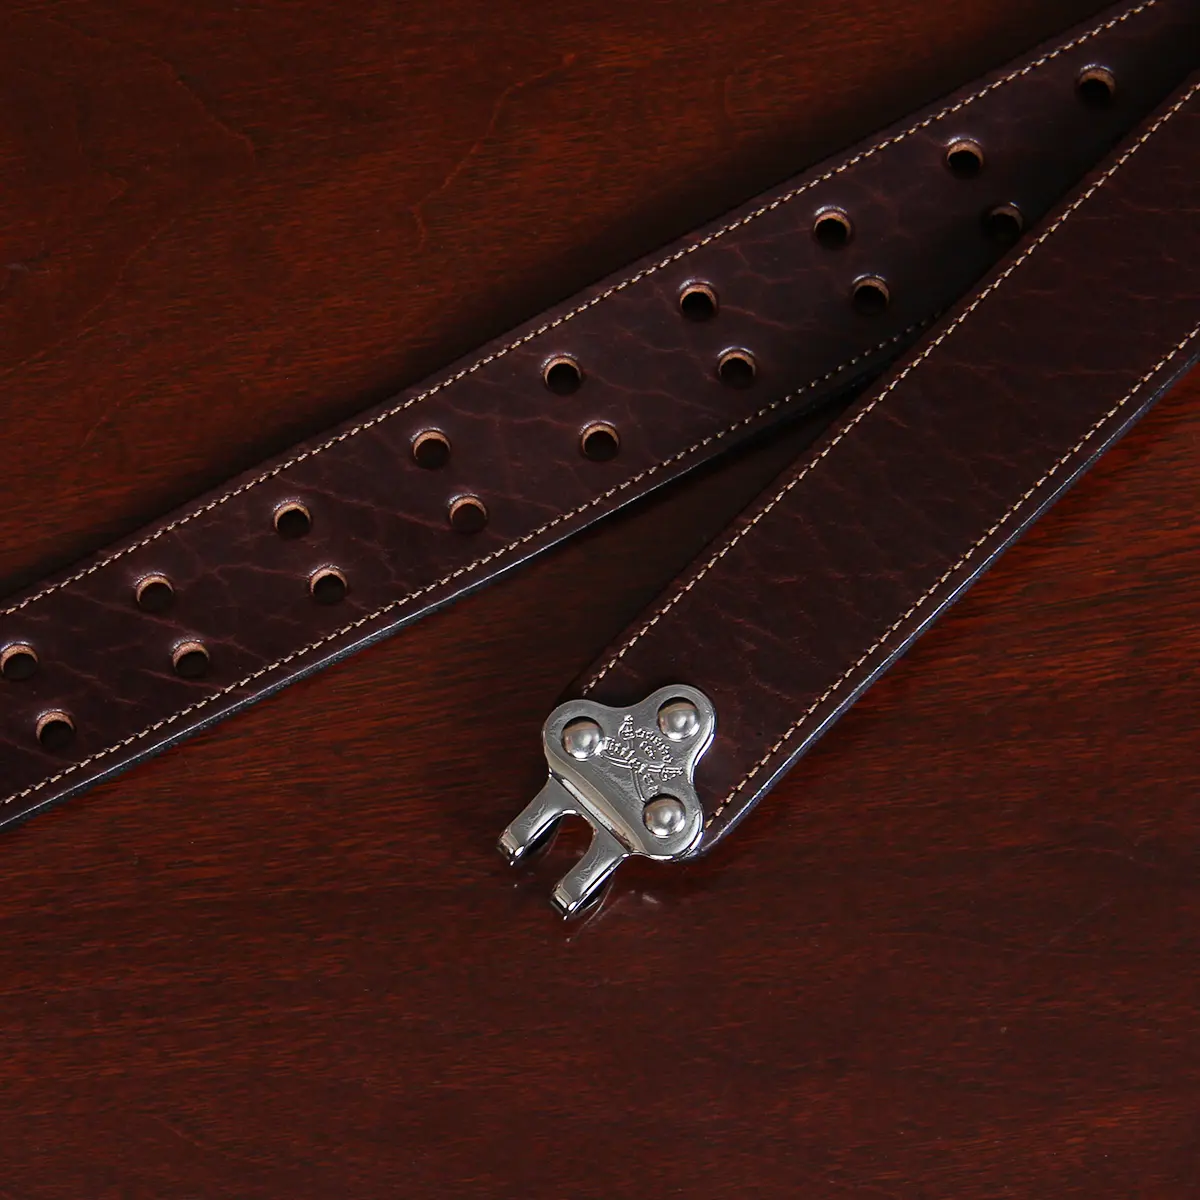 Black Bridle Leather Belt by Hooks Crafted Leather Co